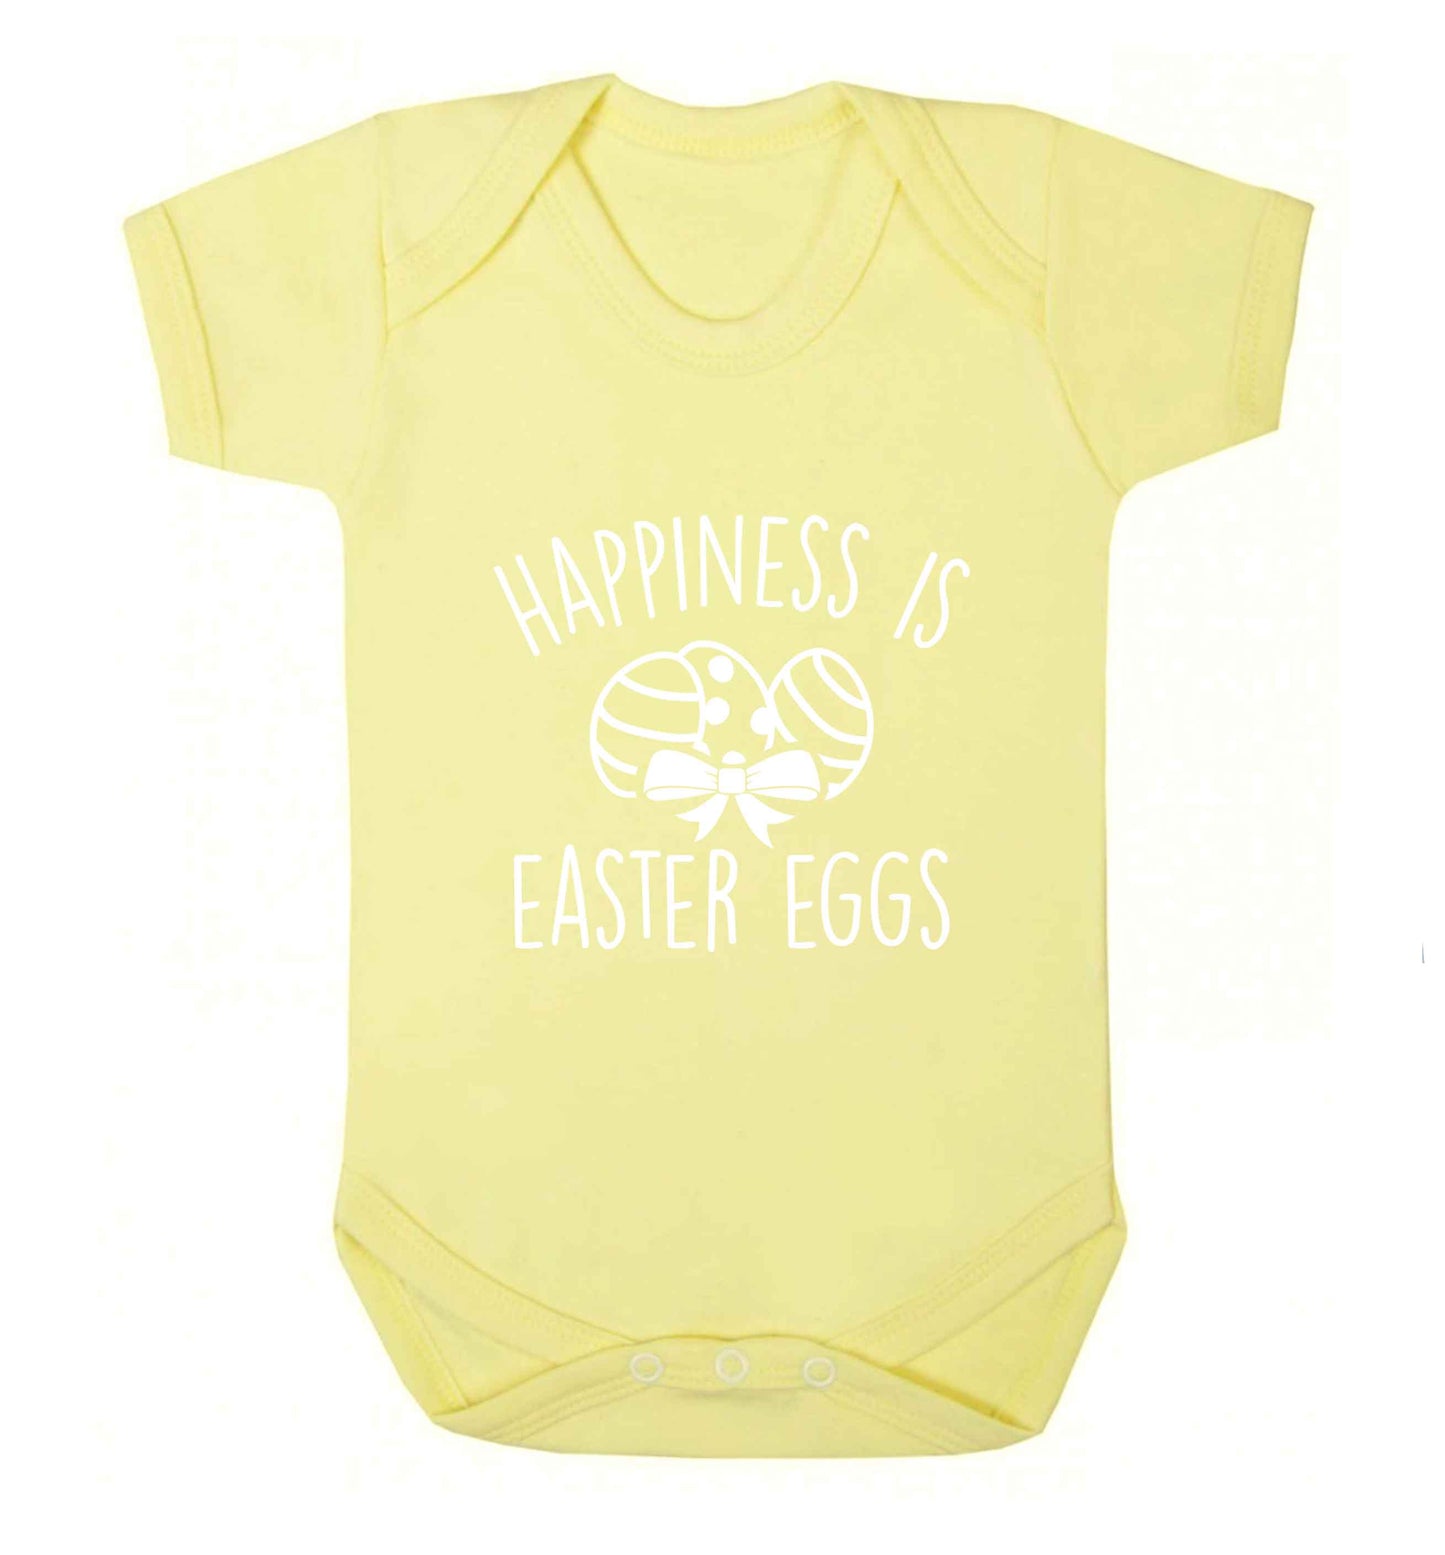 Happiness is Easter eggs baby vest pale yellow 18-24 months